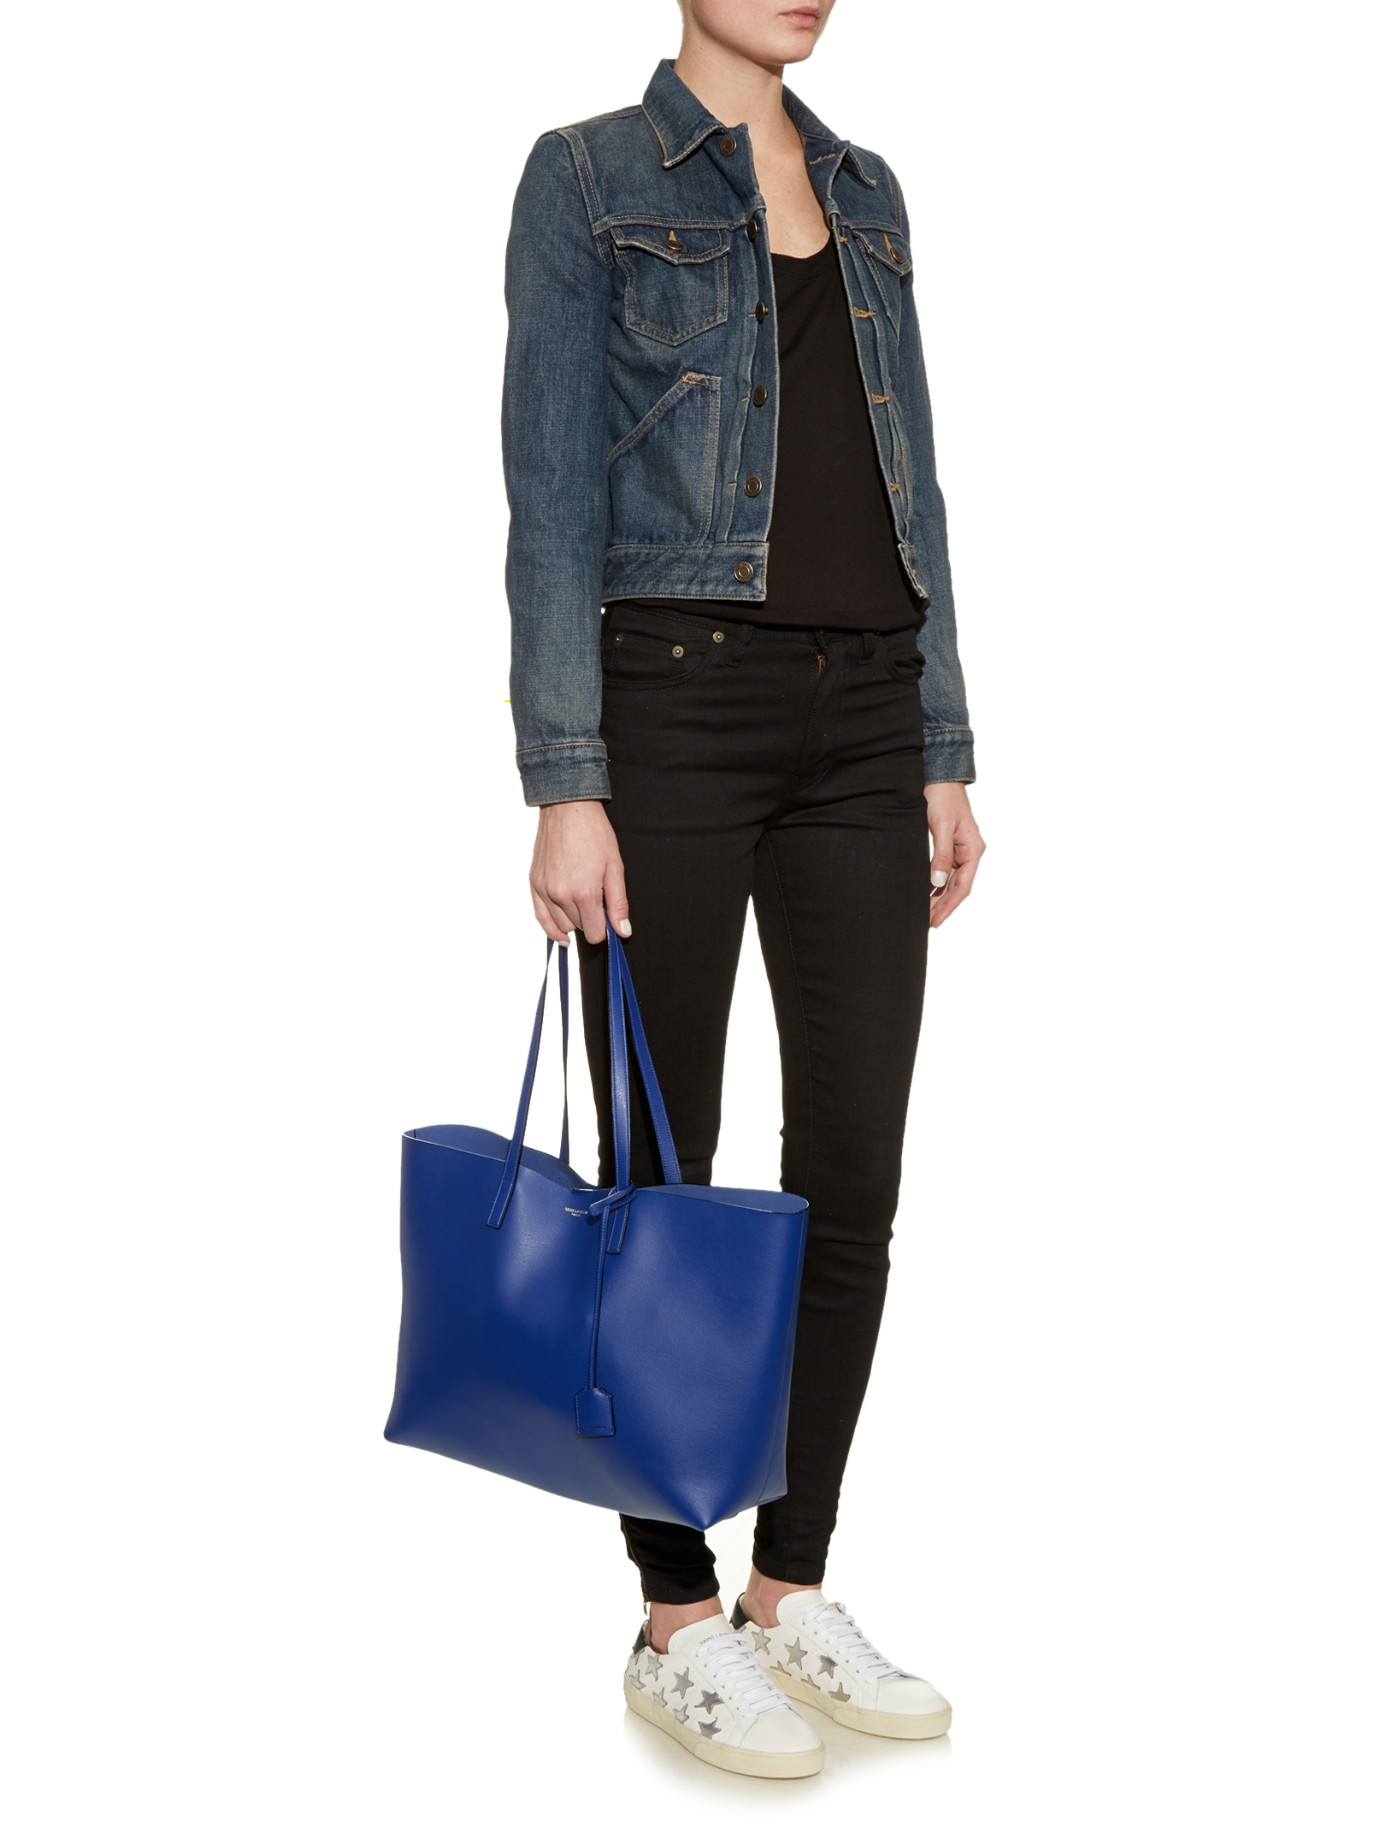 Saint Laurent Large Leather Shopping Bag in Blue - Lyst